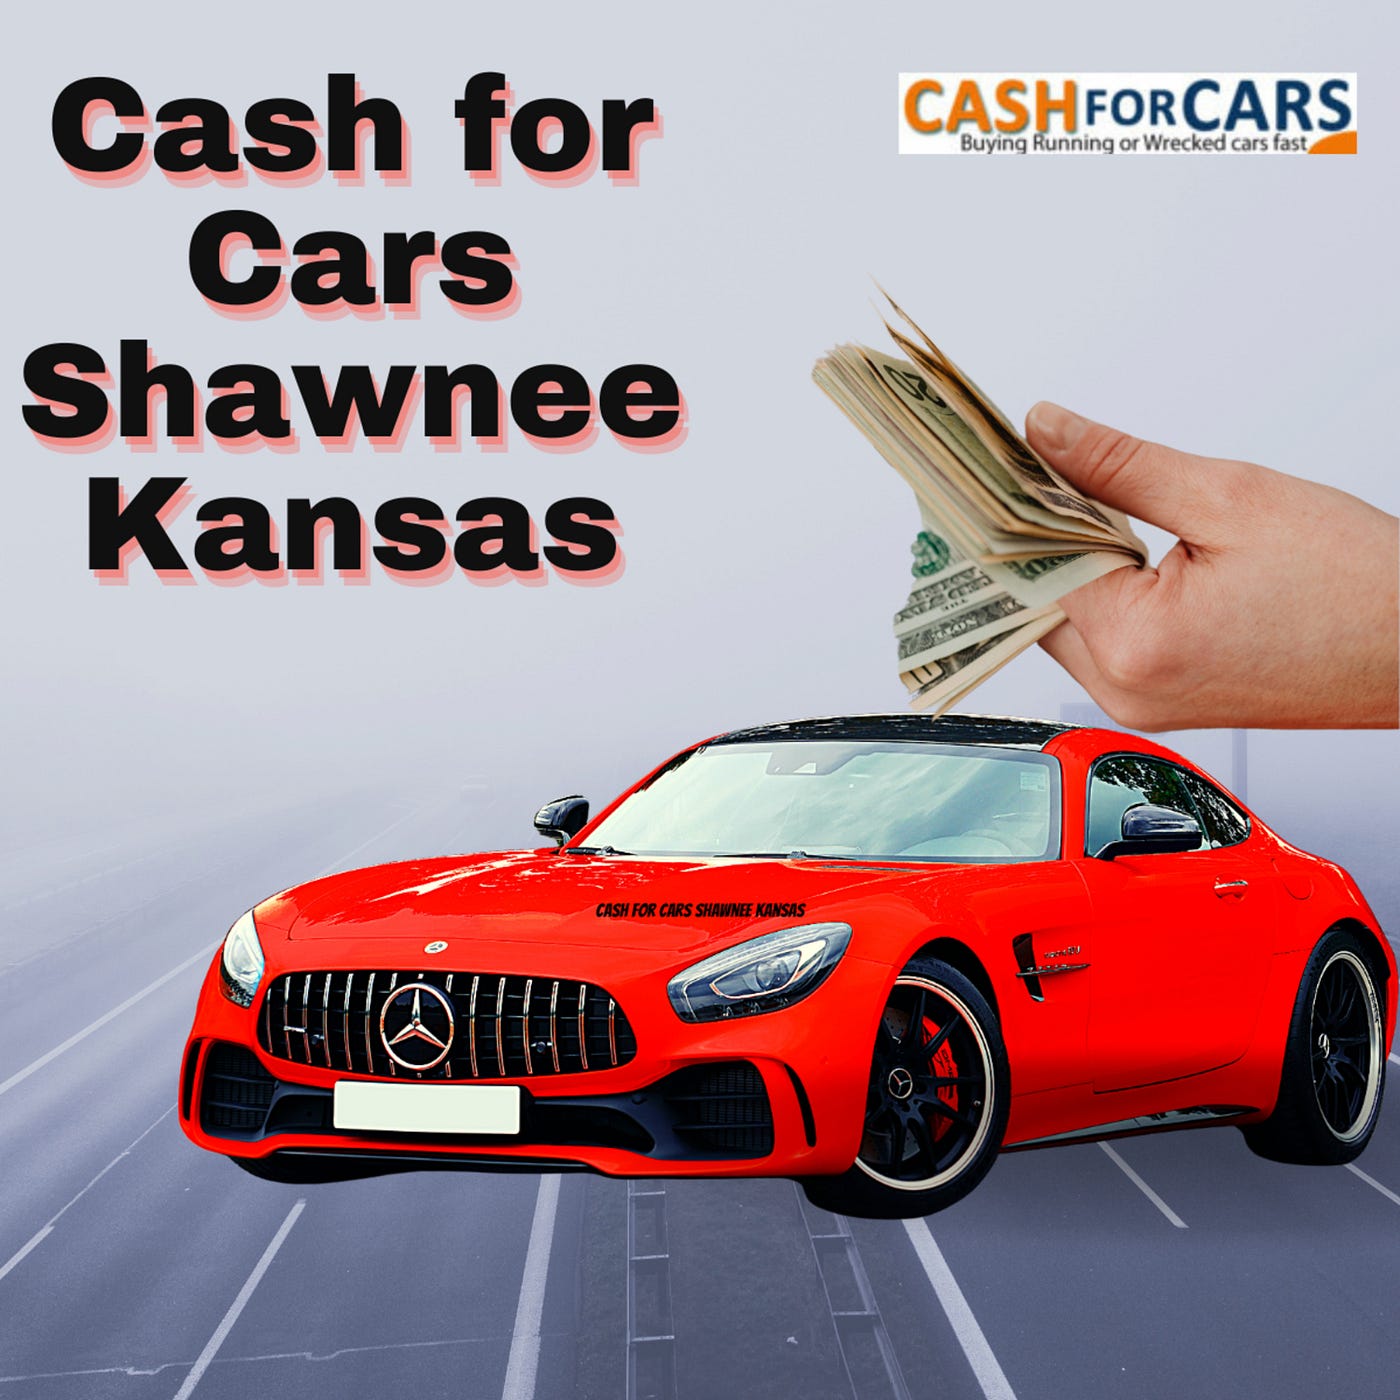 How Much Do Cash For Cars Pay For A Wrecked Sportscar?